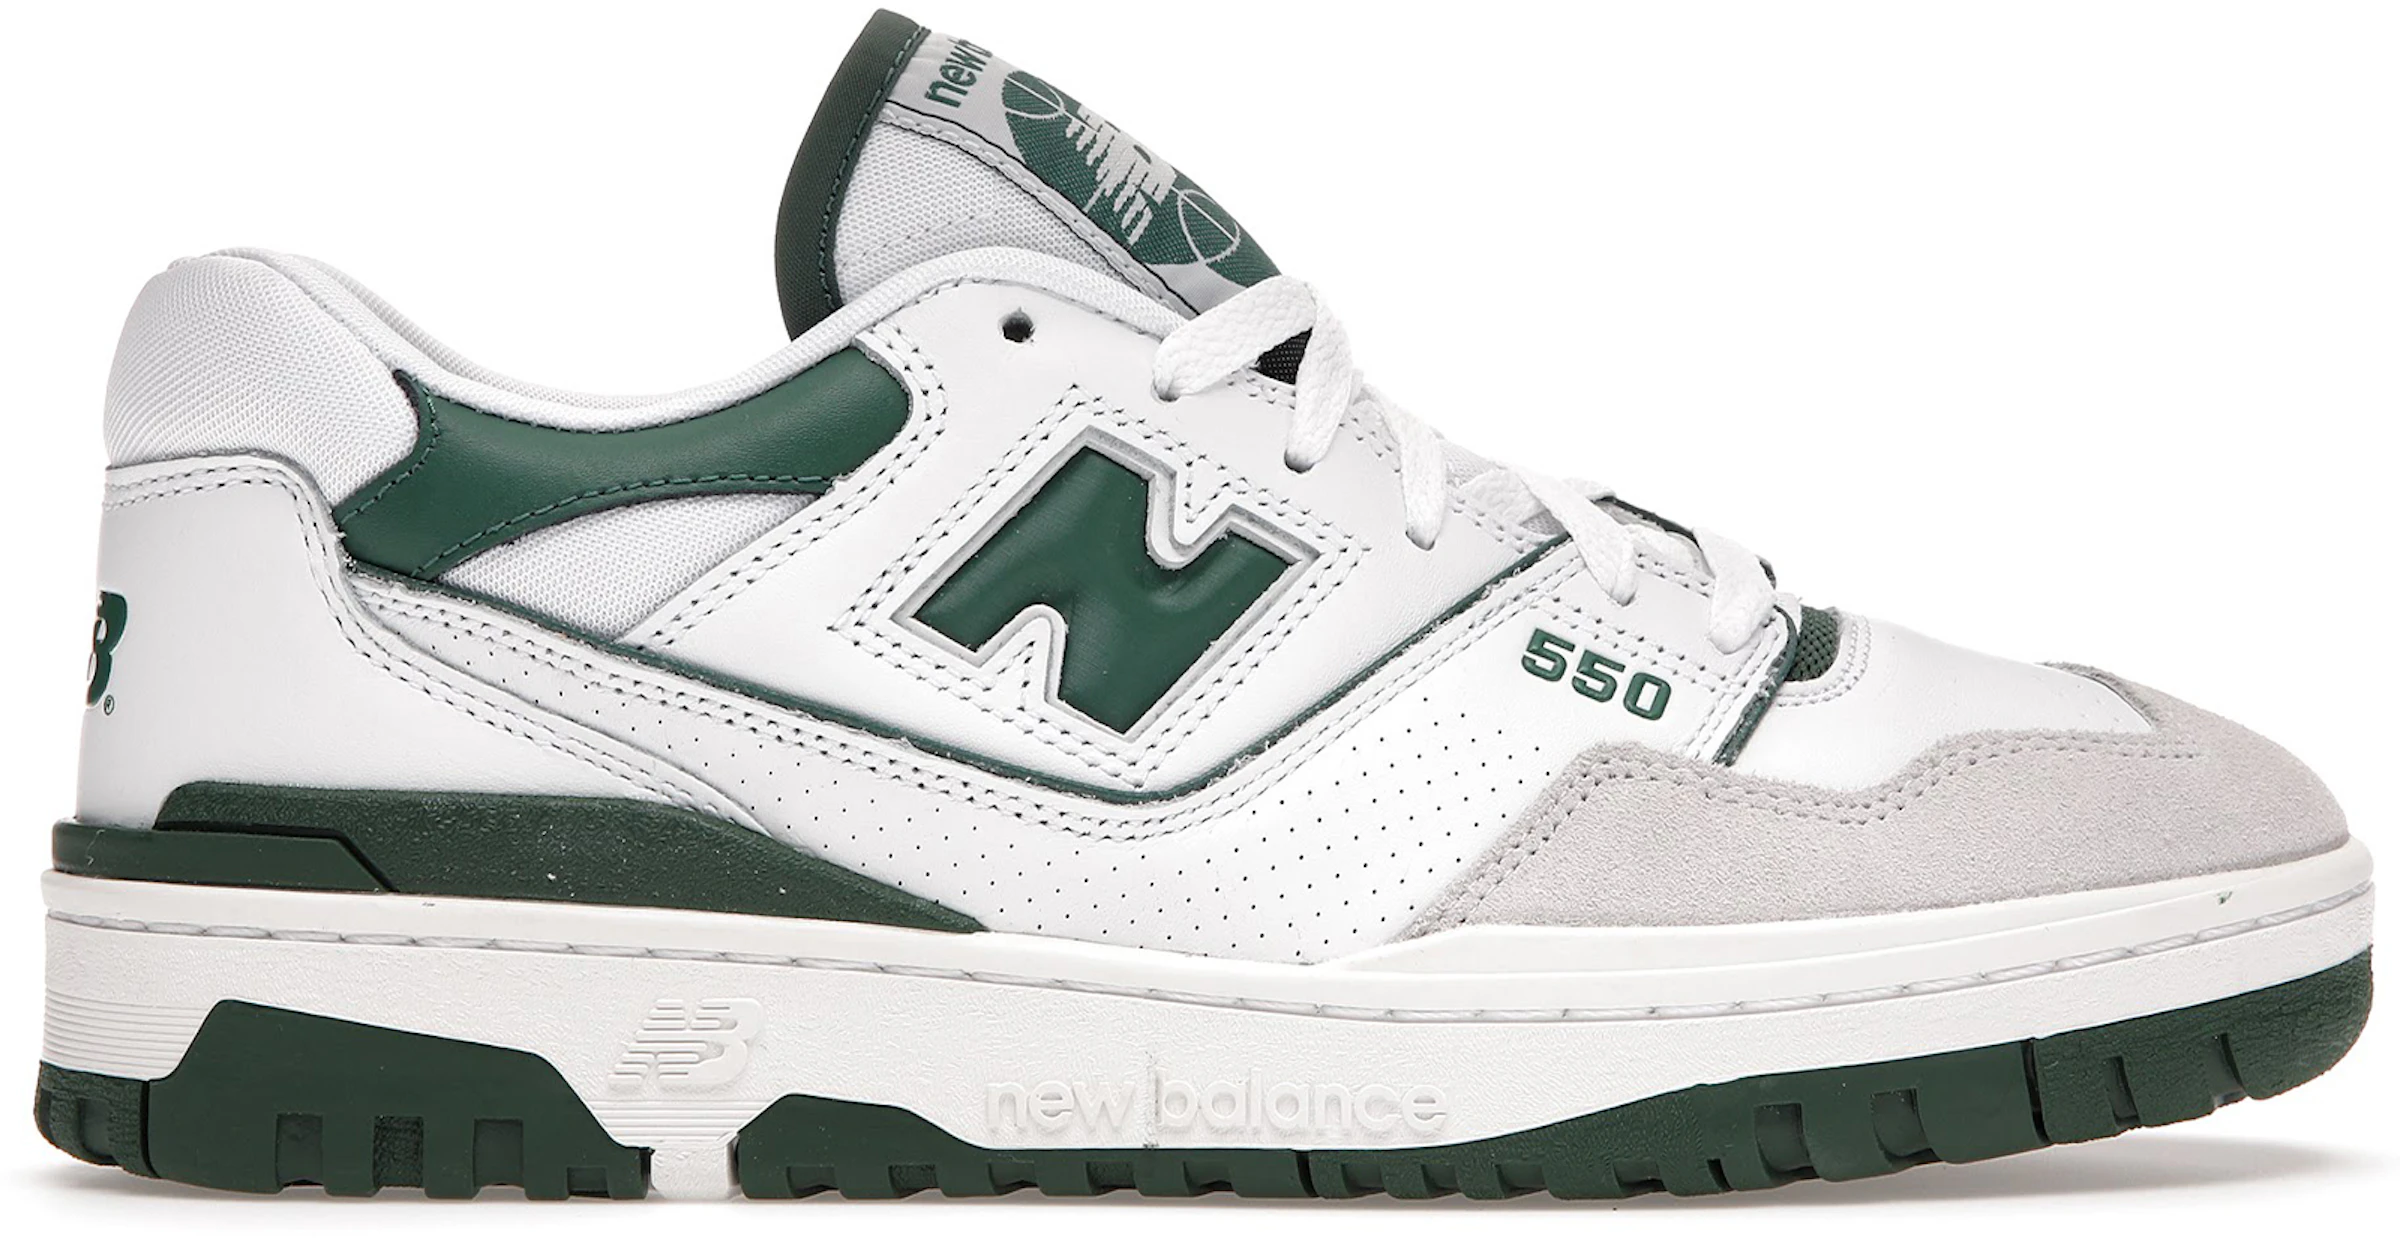 Buy New Balance Shoes & Sneakers - StockX